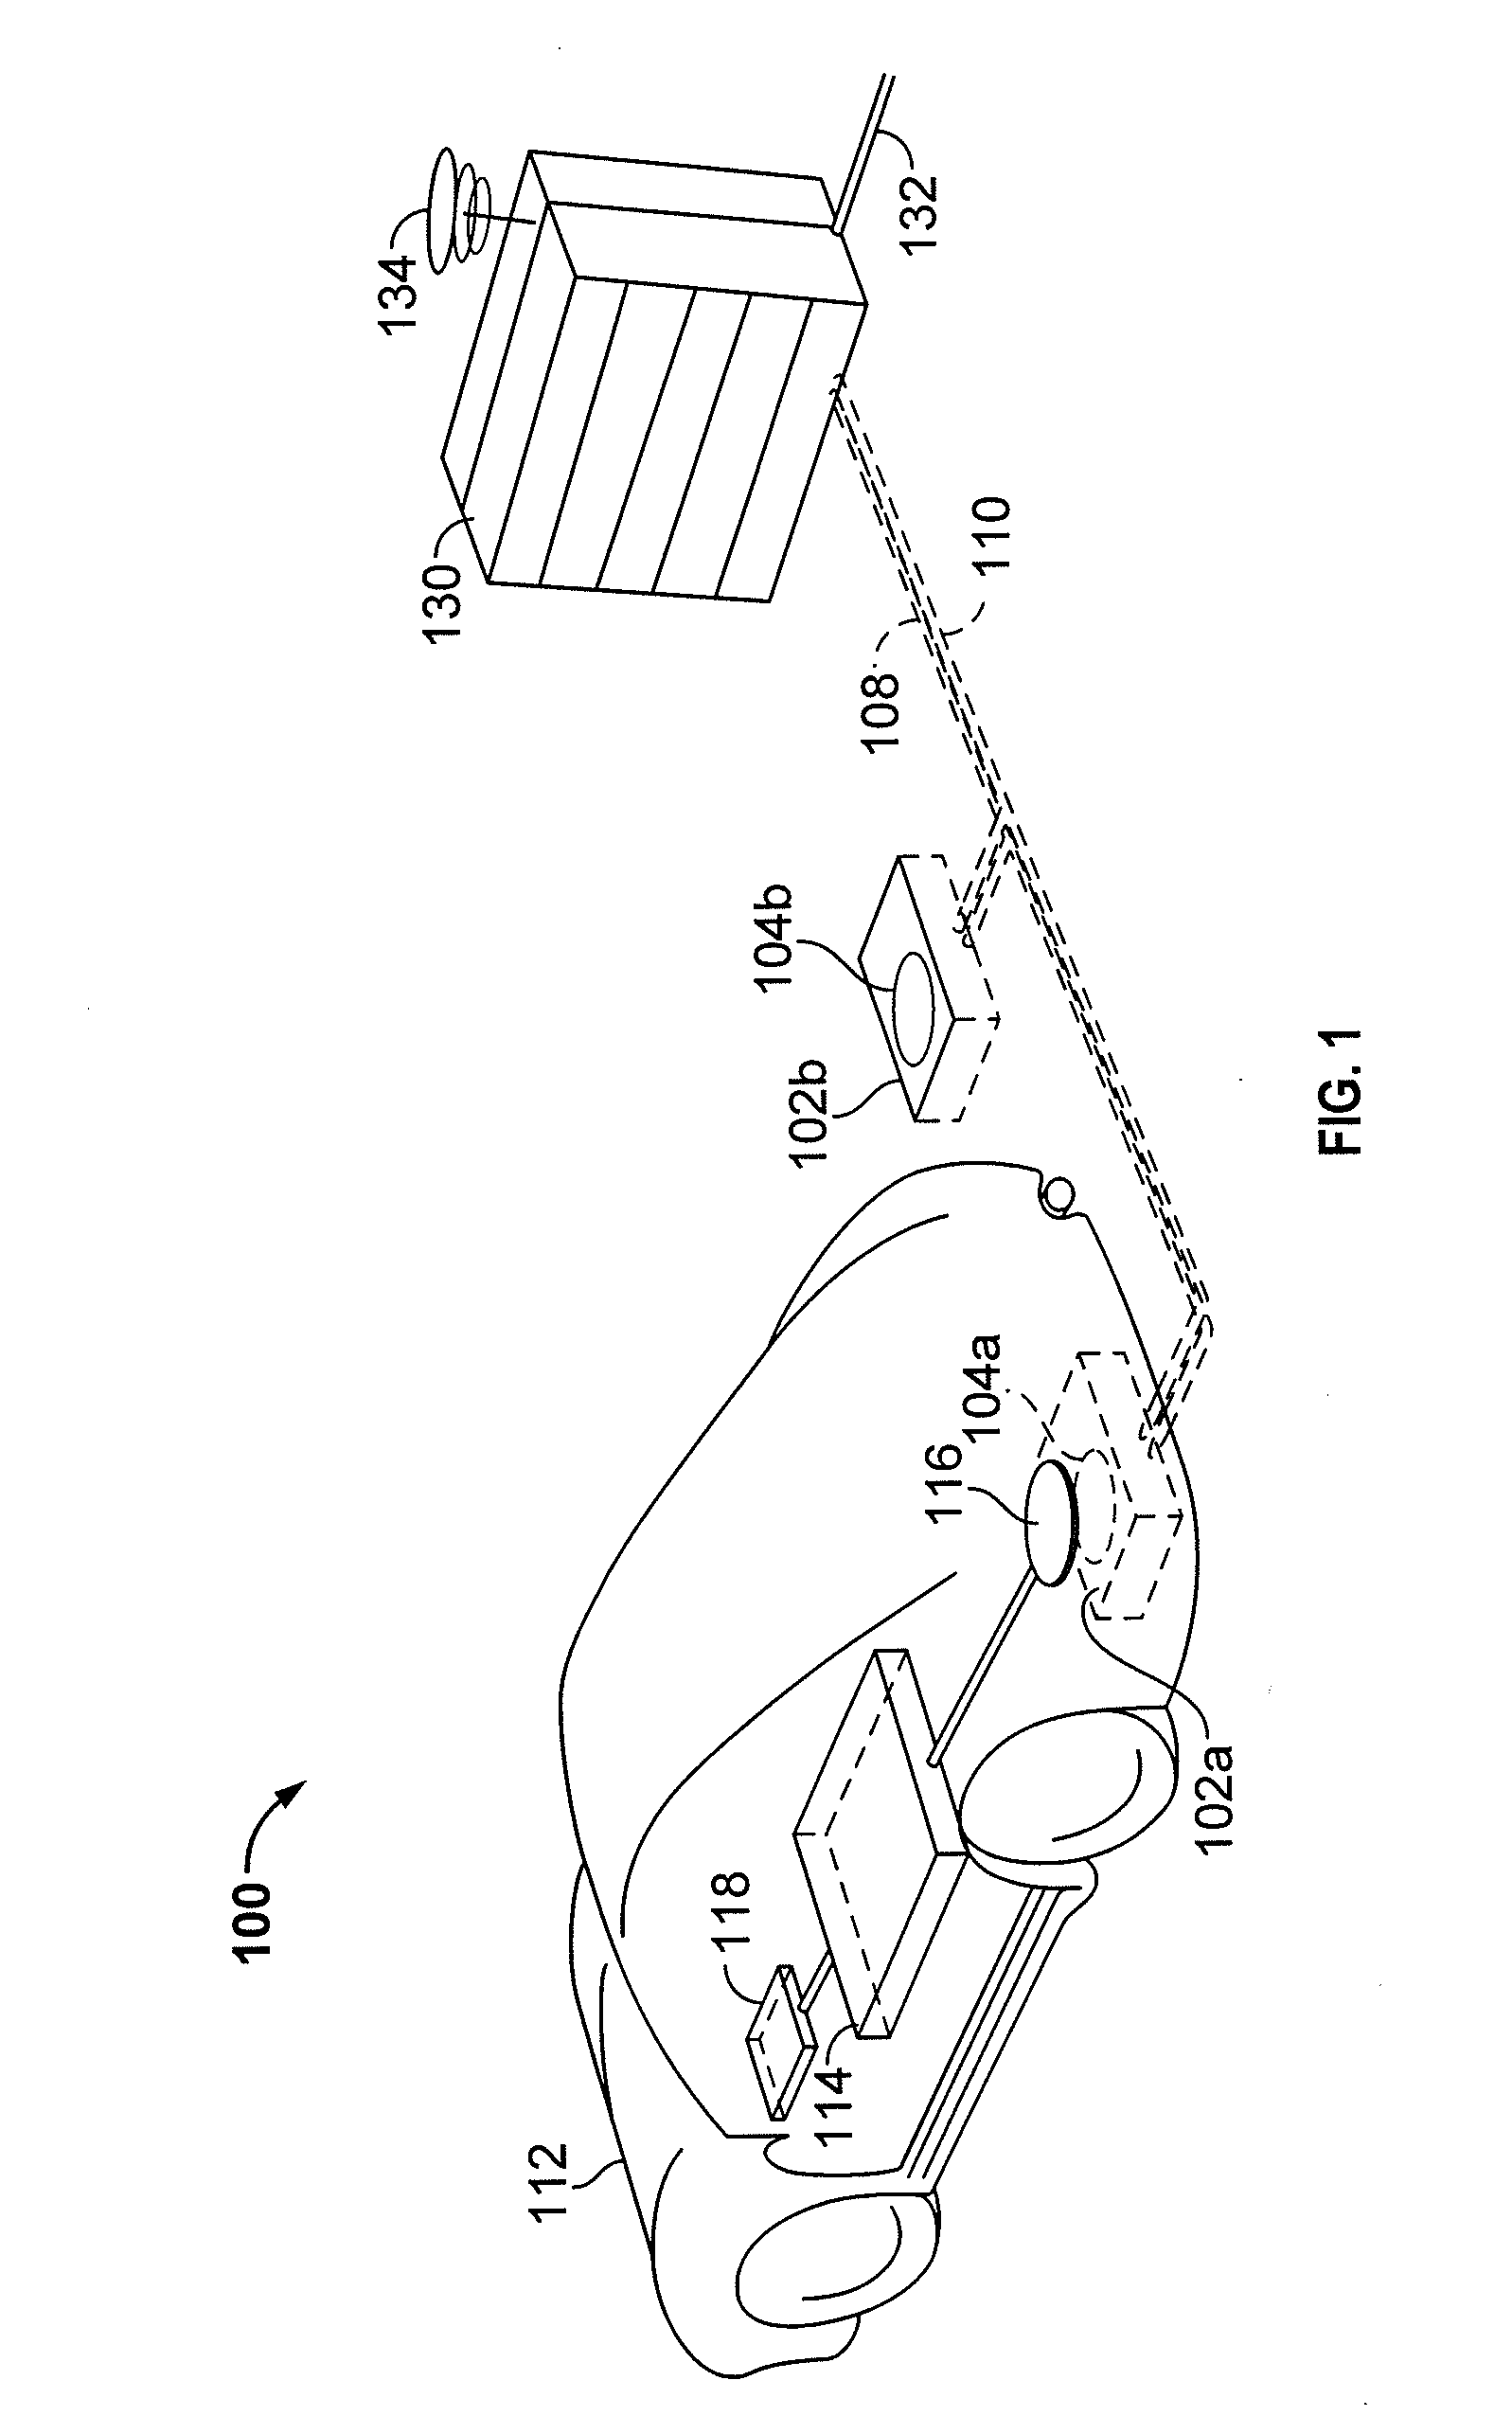 Systems, methods, and apparatus for detecting ferromagnetic foreign objects in a predetermined space